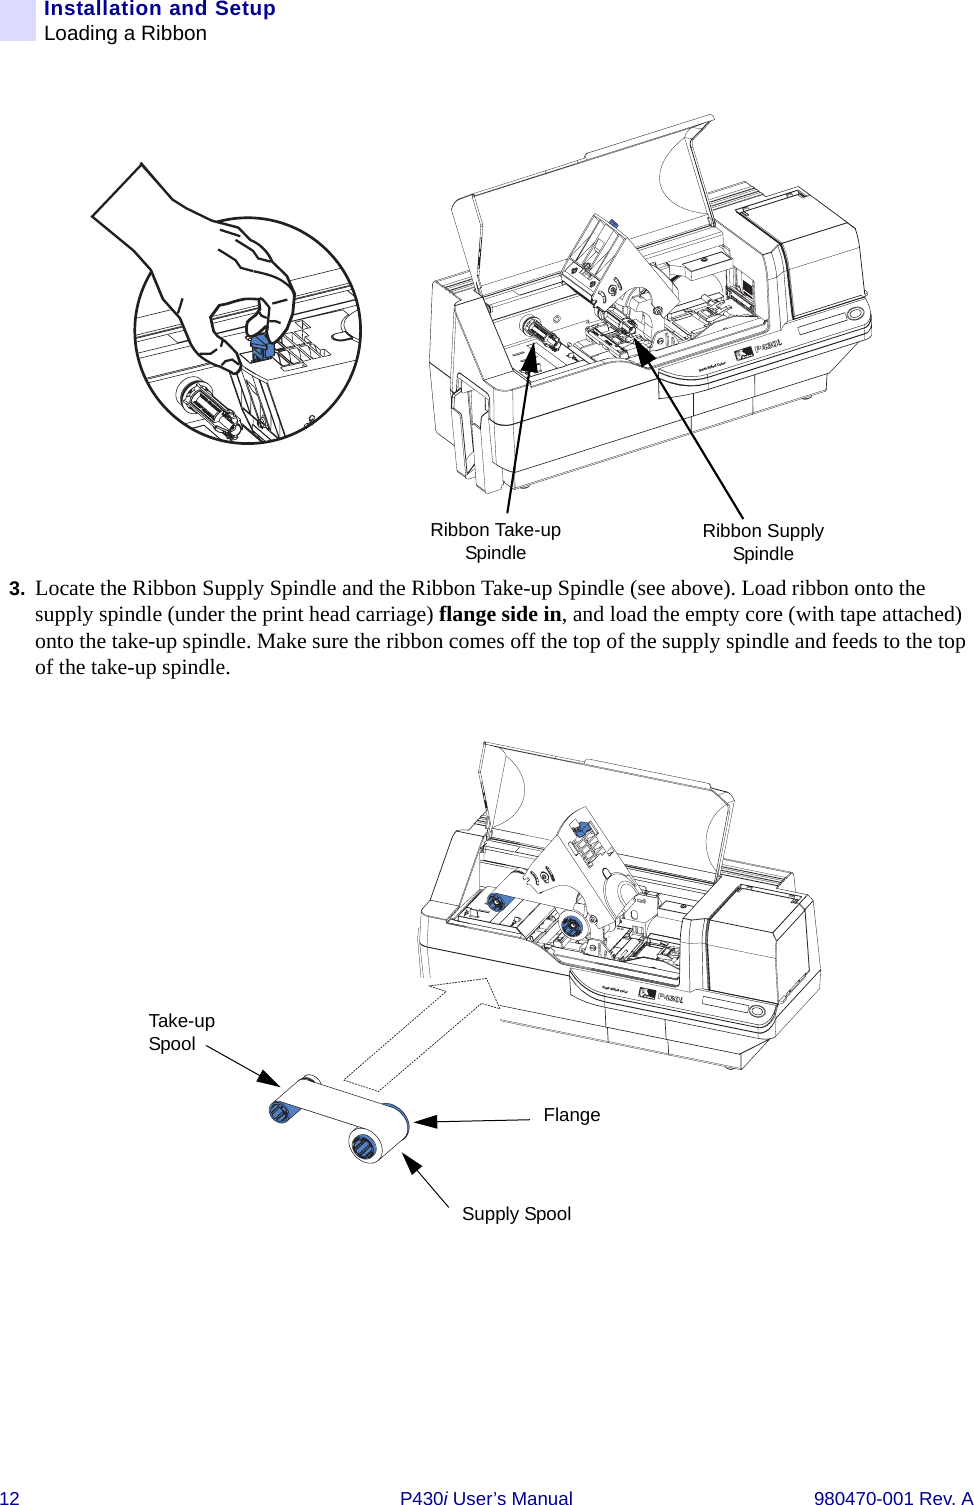 12 P430i User’s Manual 980470-001 Rev. AInstallation and SetupLoading a Ribbon3. Locate the Ribbon Supply Spindle and the Ribbon Take-up Spindle (see above). Load ribbon onto the supply spindle (under the print head carriage) flange side in, and load the empty core (with tape attached) onto the take-up spindle. Make sure the ribbon comes off the top of the supply spindle and feeds to the top of the take-up spindle.Dual-Sided ColorRibbon Supply SpindleRibbon Take-up SpindleDual-Sided ColorFlangeSupply SpoolTake-up Spool